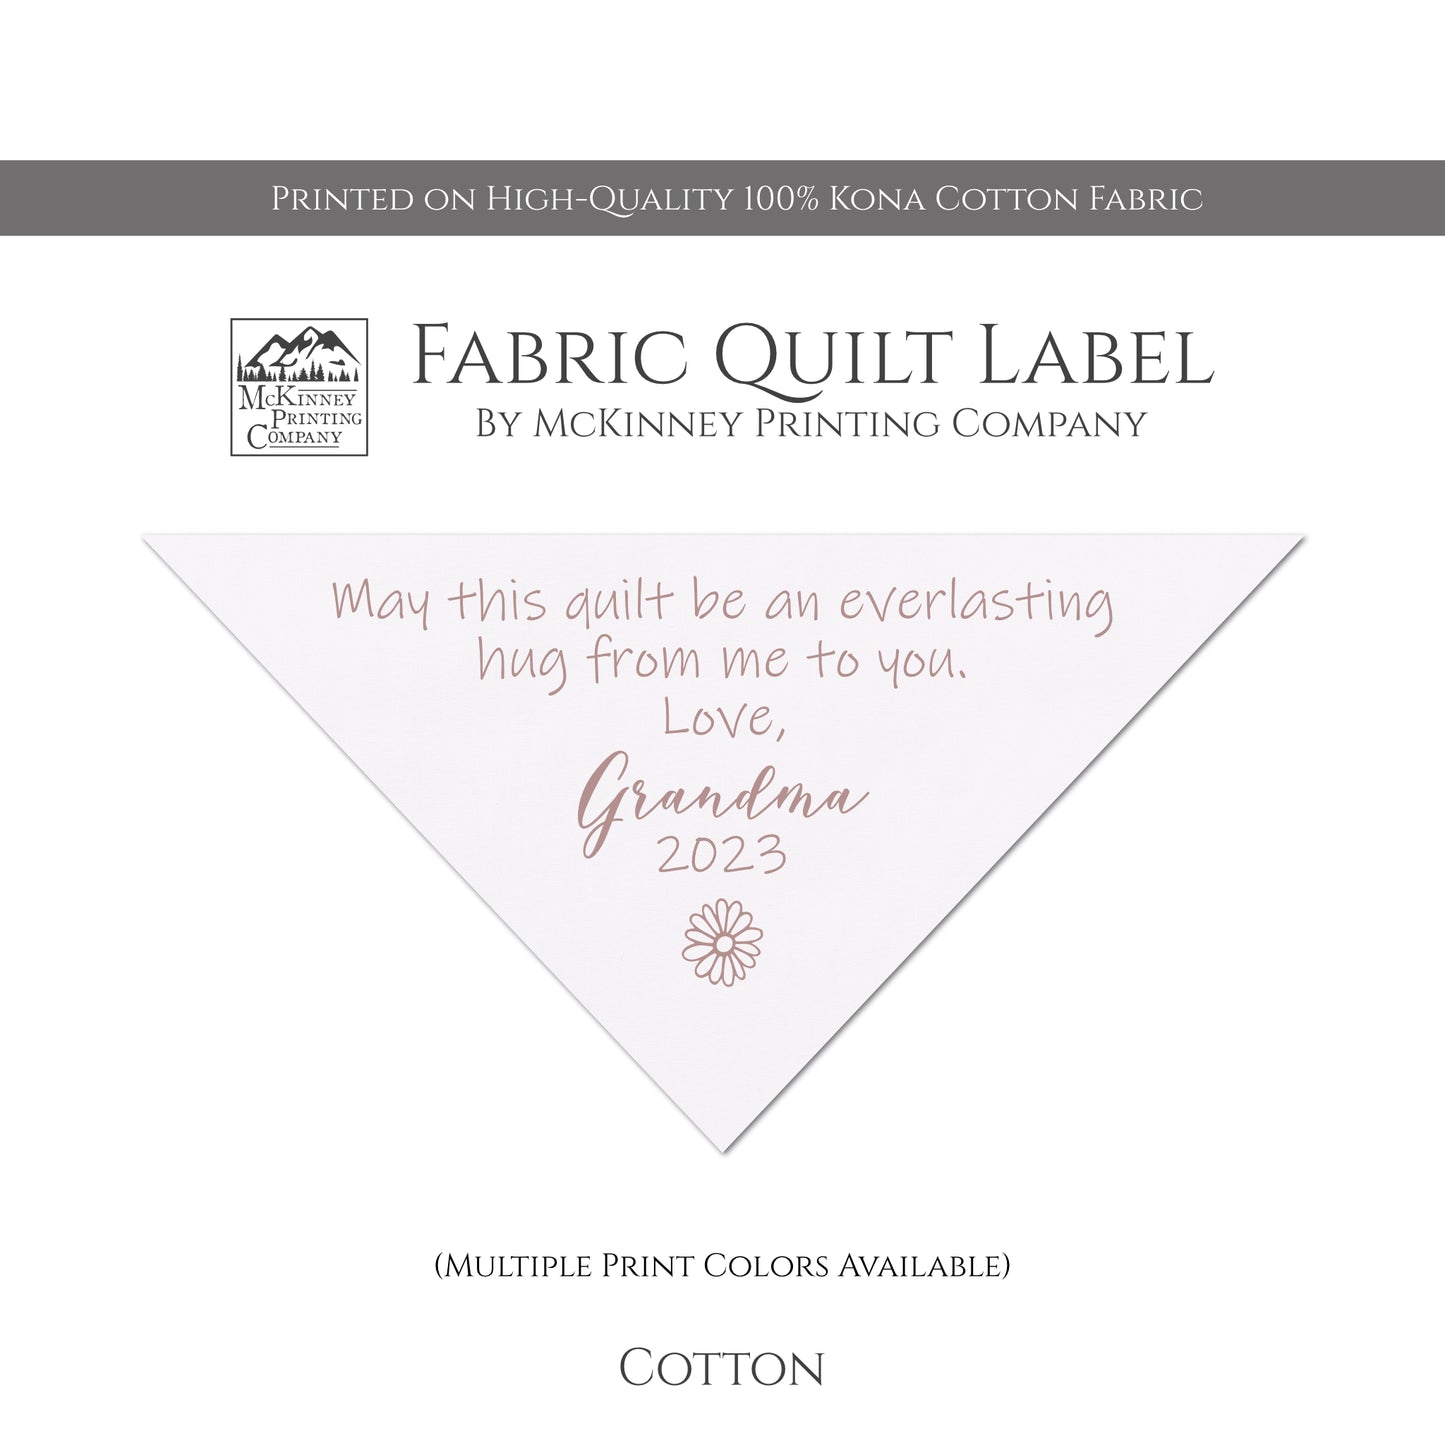 Triangle Quilt Label for Quilts - Cotton, White